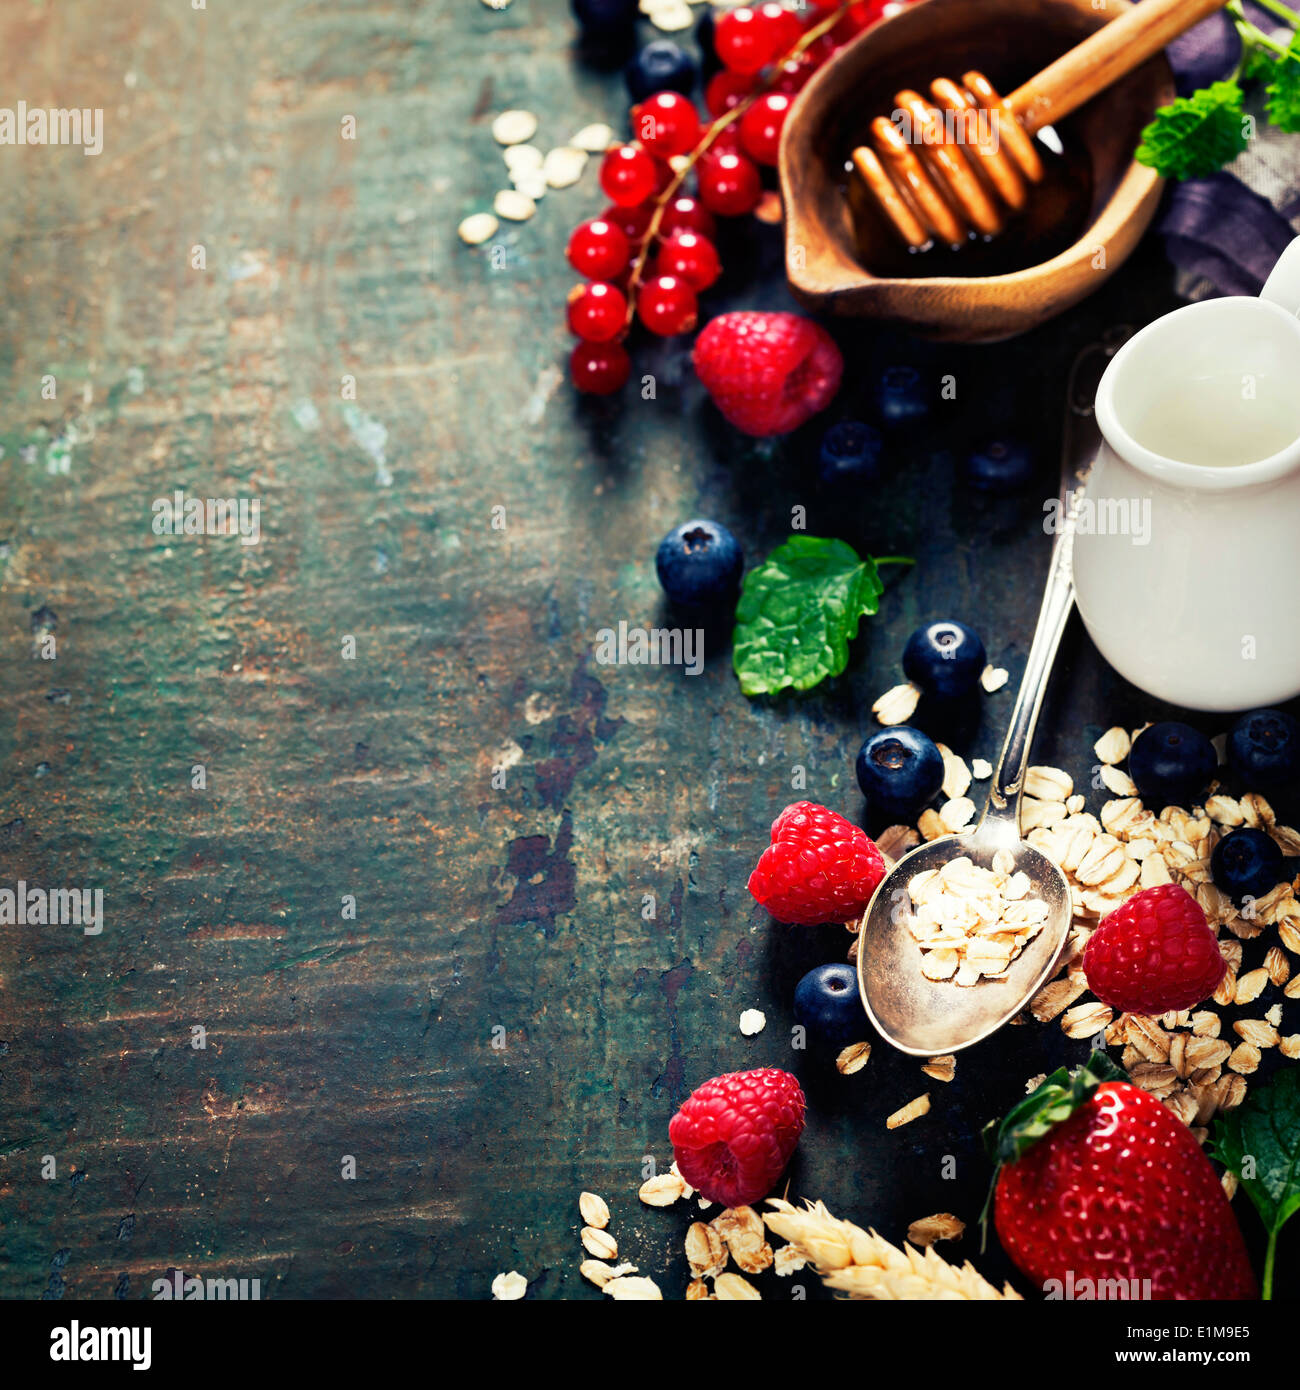 Healthy Breakfast.Oat flake, berries and fresh milk. Health and diet concept Stock Photo